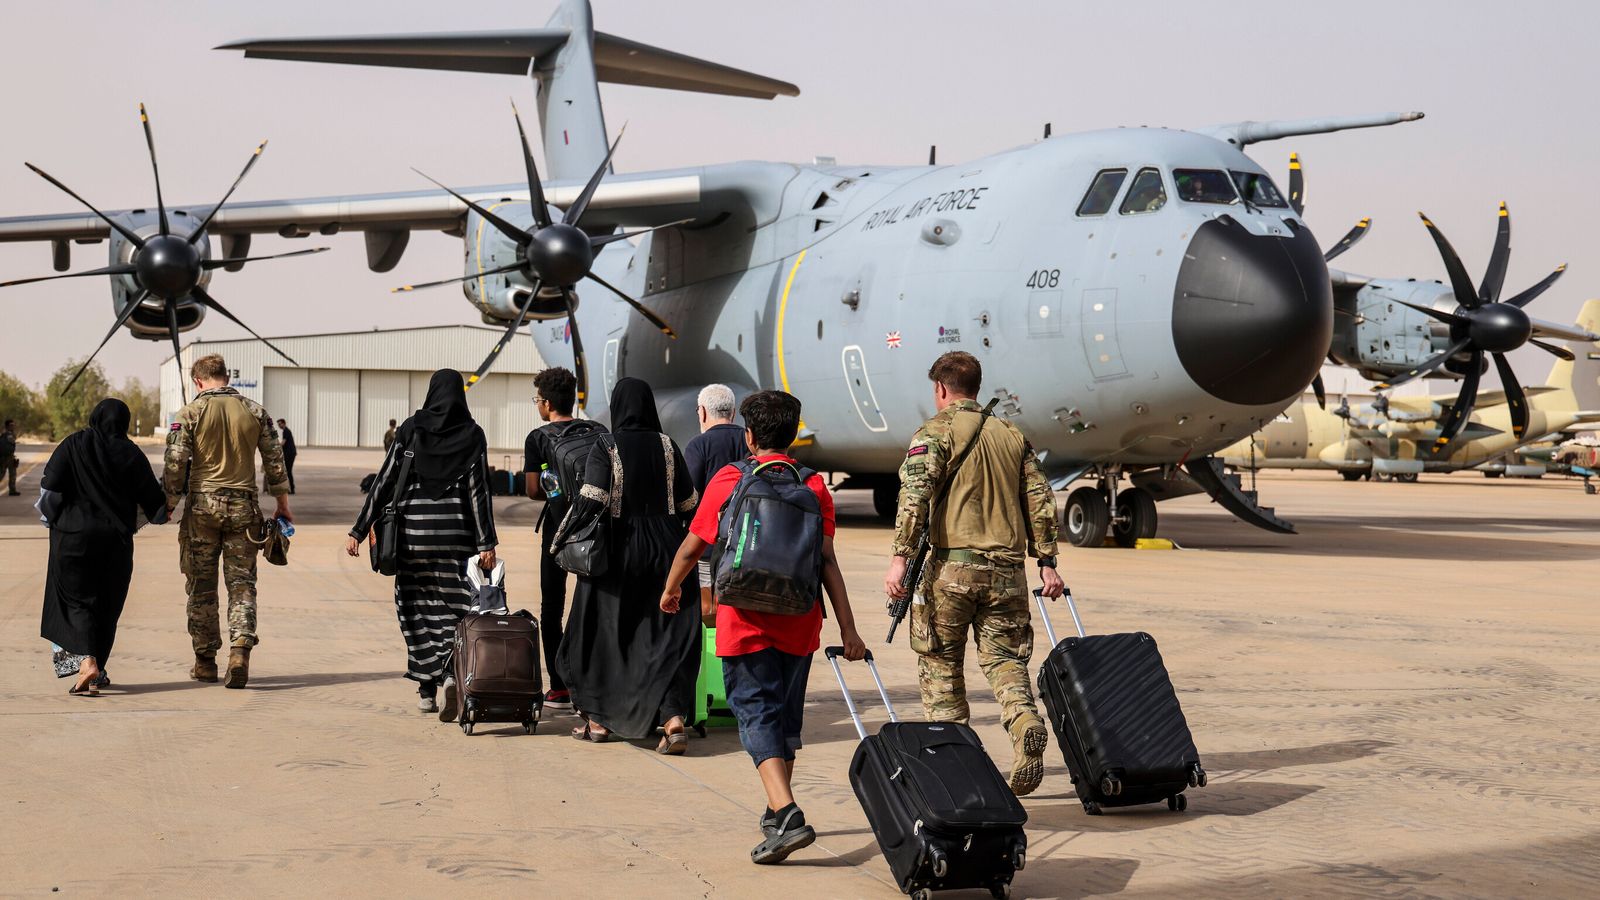 Sudan: British nationals have 24 hours to catch an evacuation flight, says deputy PM